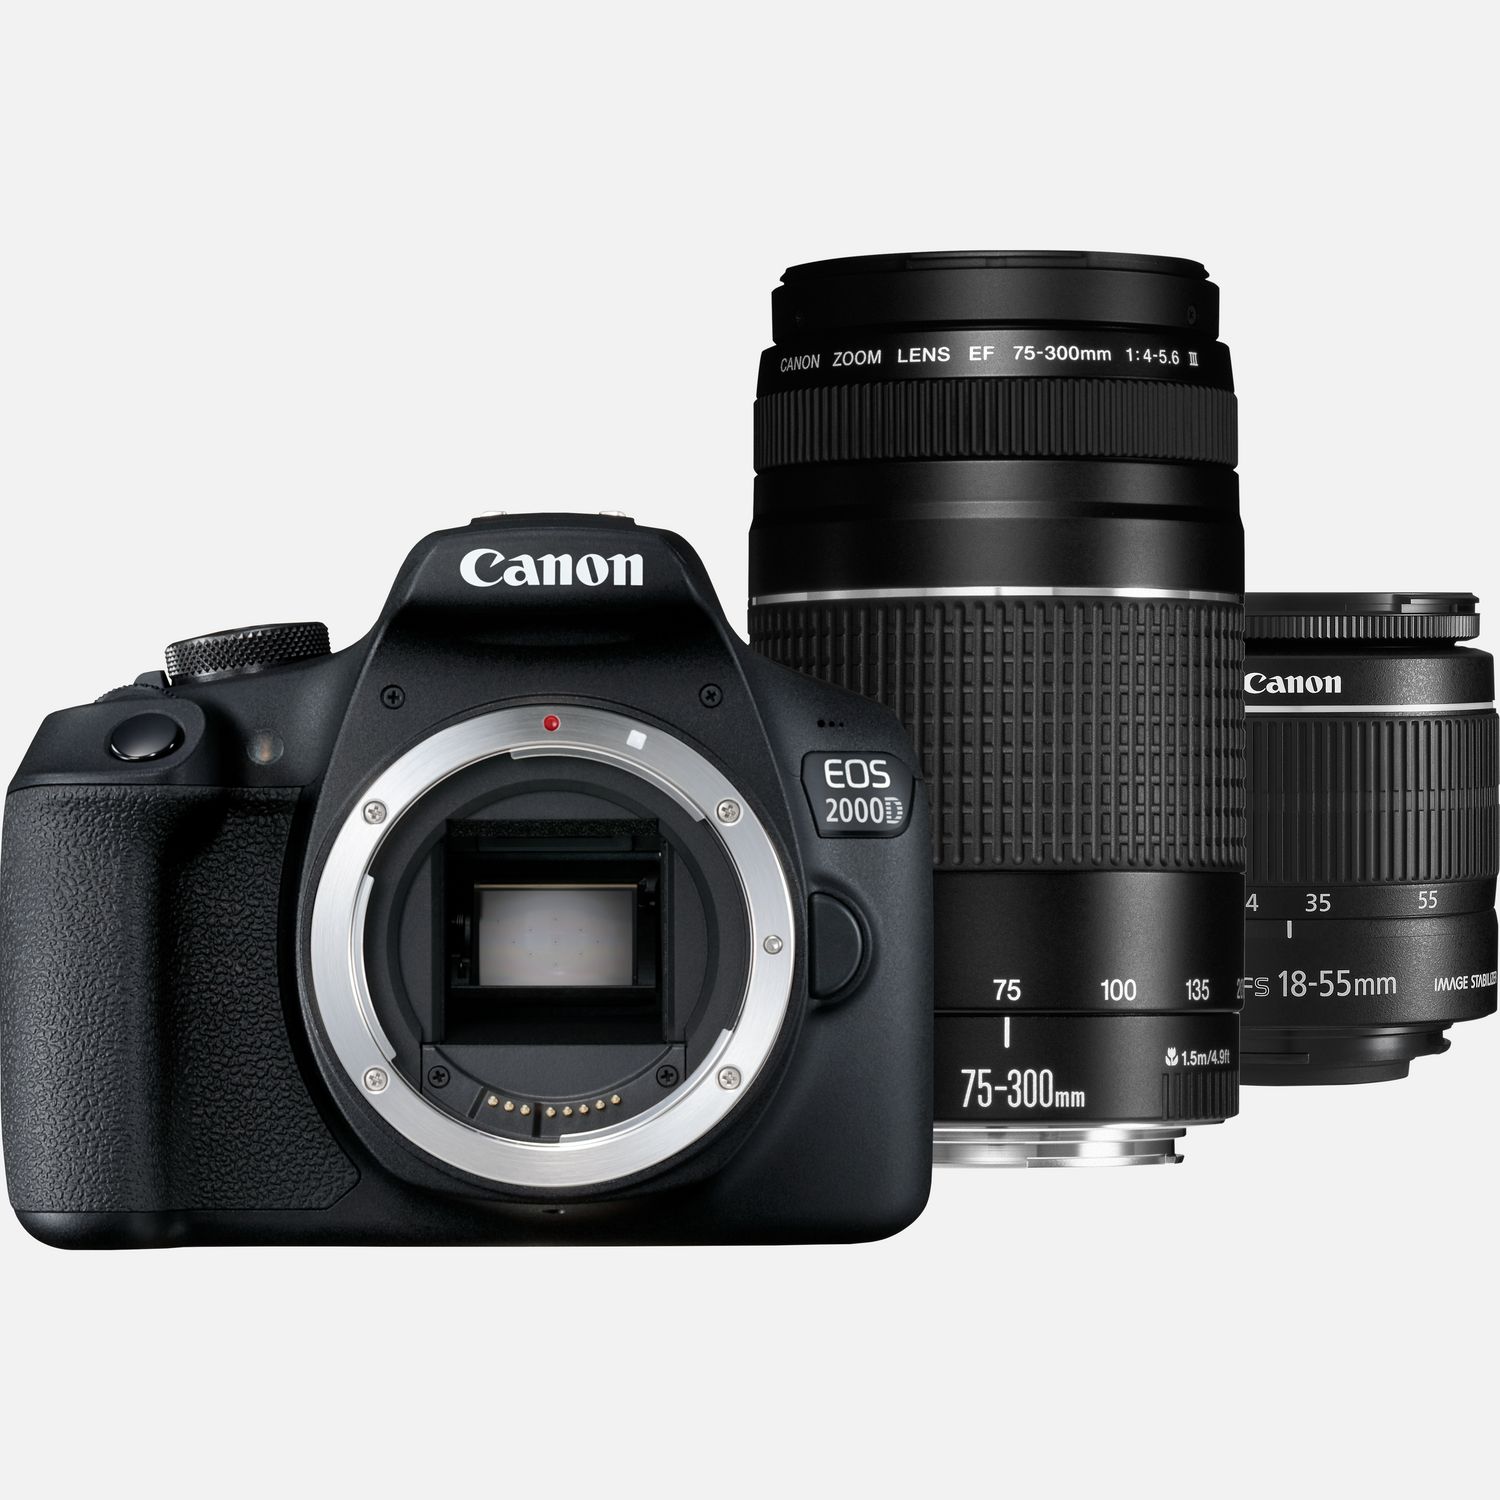 https://i1.adis.ws/i/canon/2728C019_EOS-2000D-18-55+75-300-Lens_01/canon-eos-2000d-ef-s-18-55mm-is-ii-lens-ef-75-300mm-iii-lens-product-front-view-with-lens?w=1500&bg=gray95